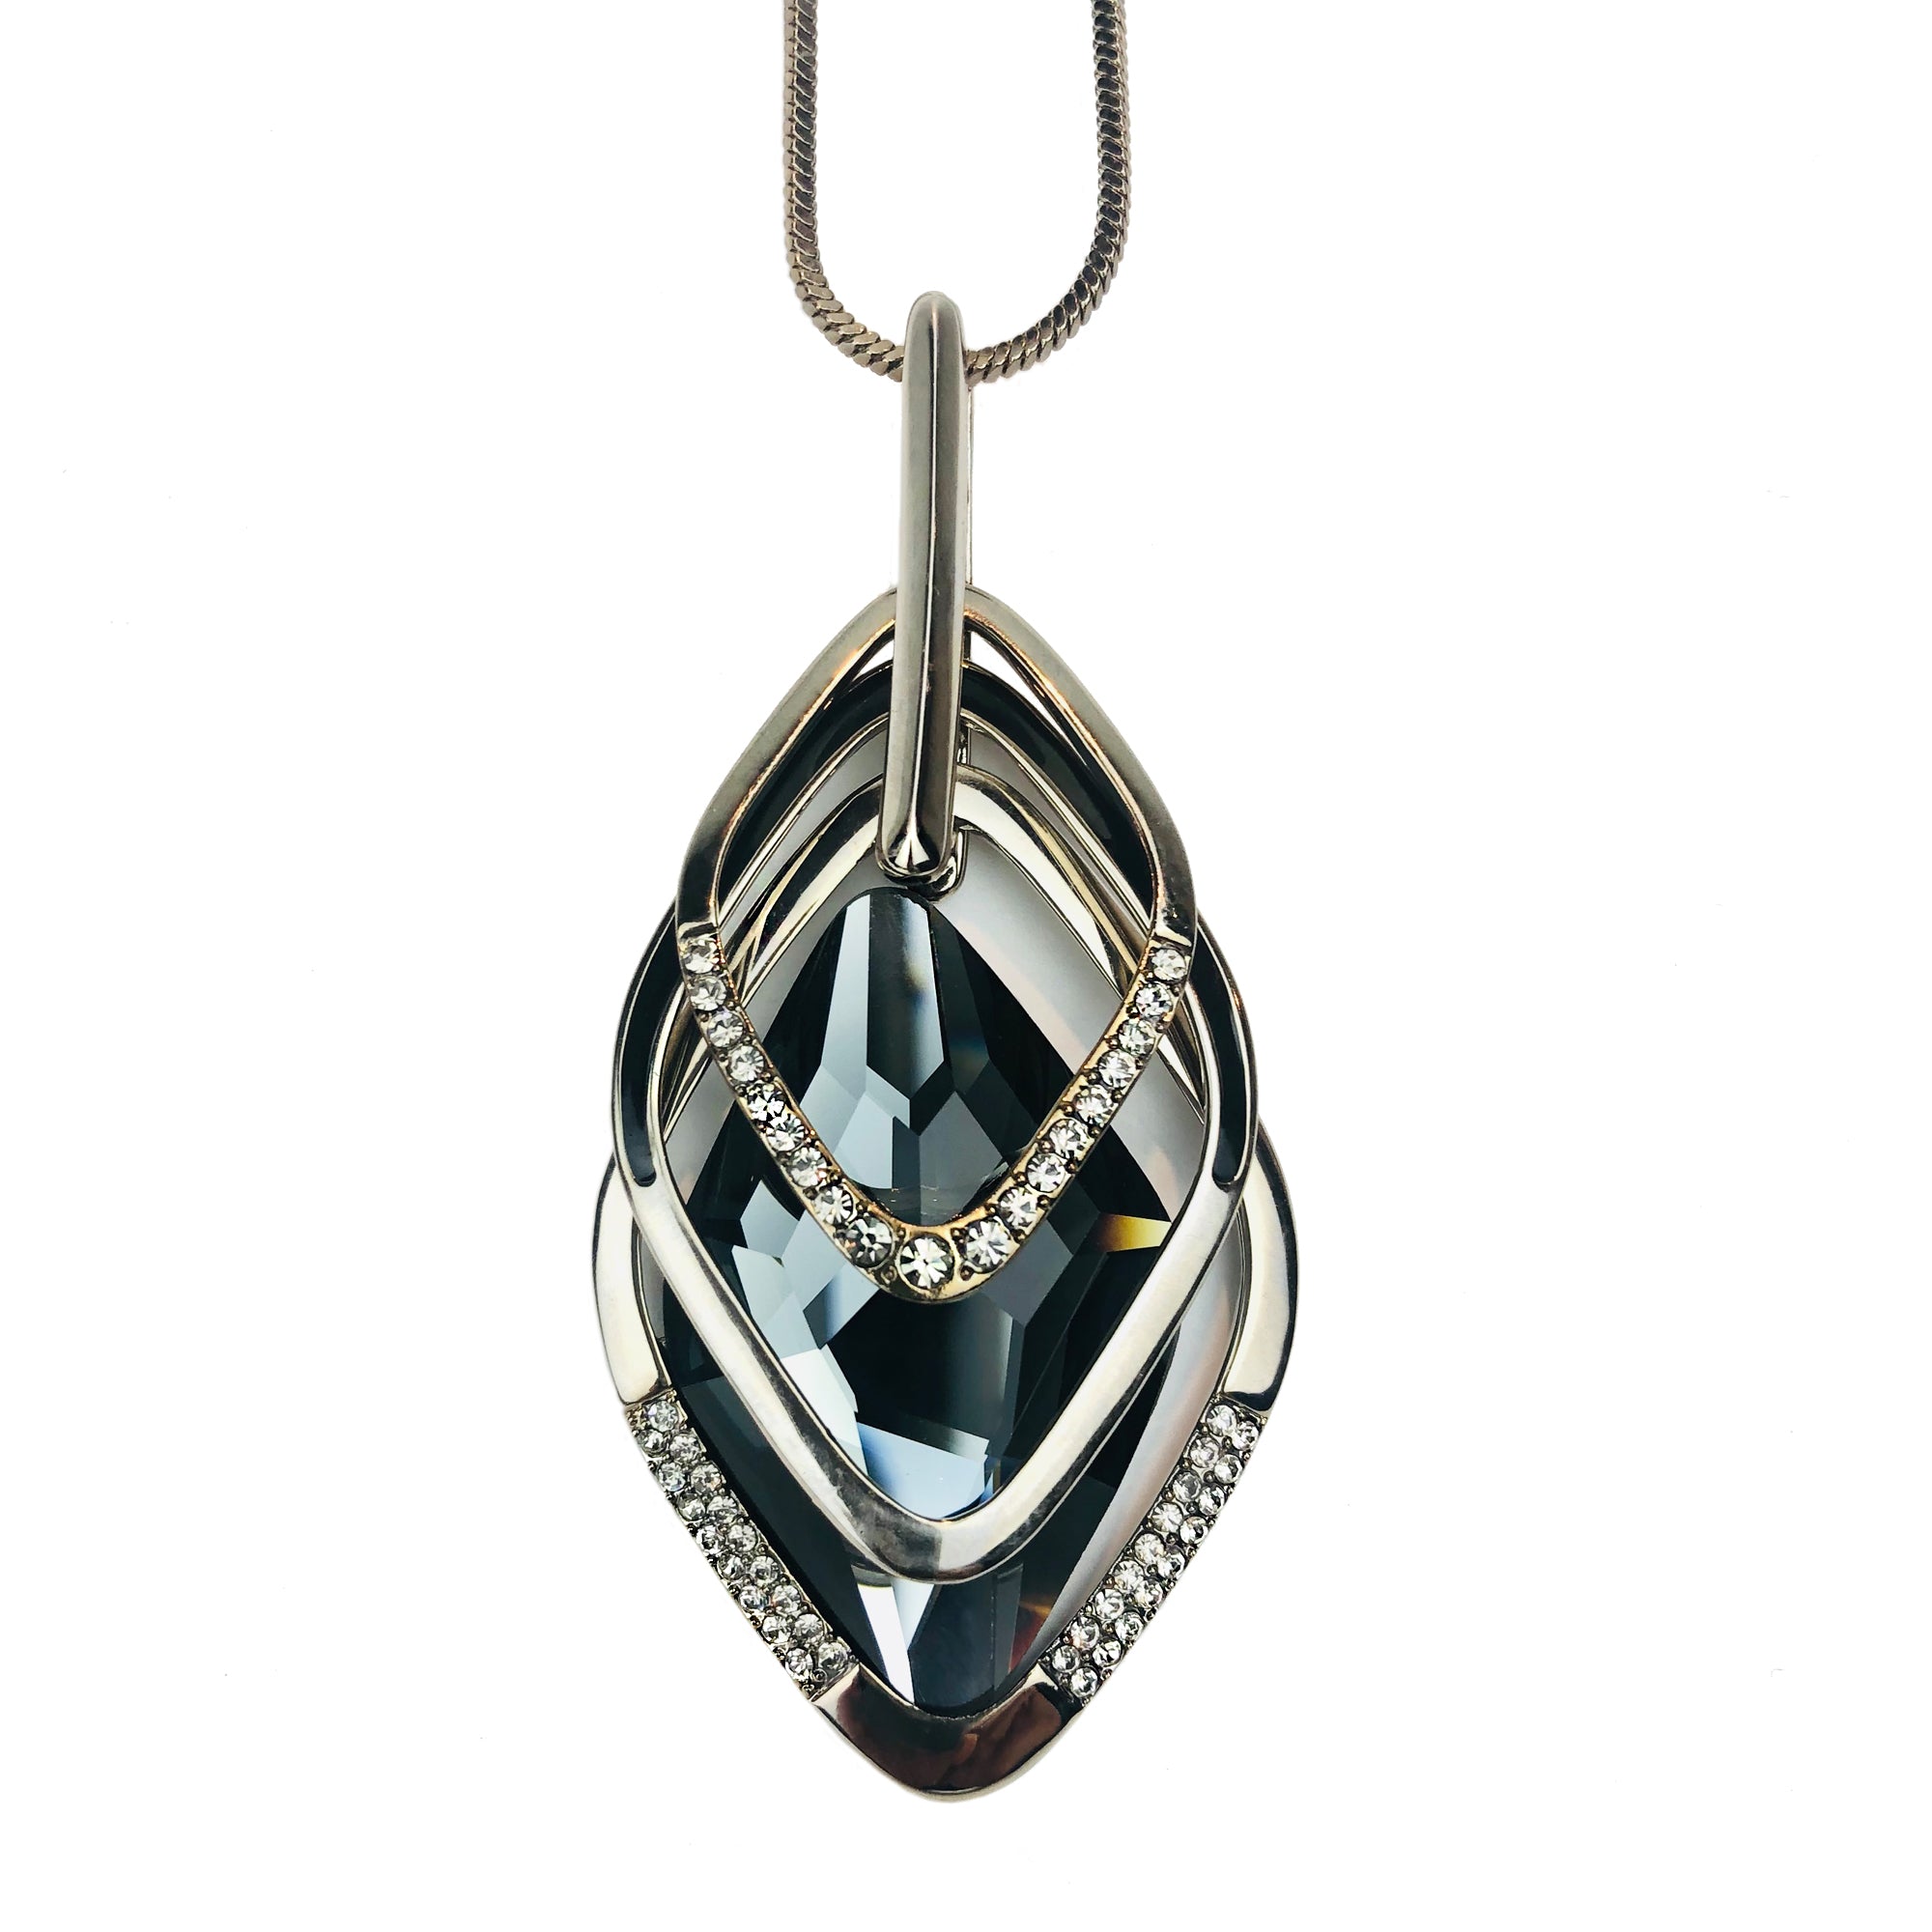 Stunning and elegantly appointed with black featured faceted diamond shaped Crystal Entwined with Cubic Zirconia Gemstones Encrusted Zirconia free floating twin shapes Lobster claw clasp Designer stamp Fixed length 17 1/2" 43.18cm popular and strong 'Box' chain Soft, brown velvet gift bag included